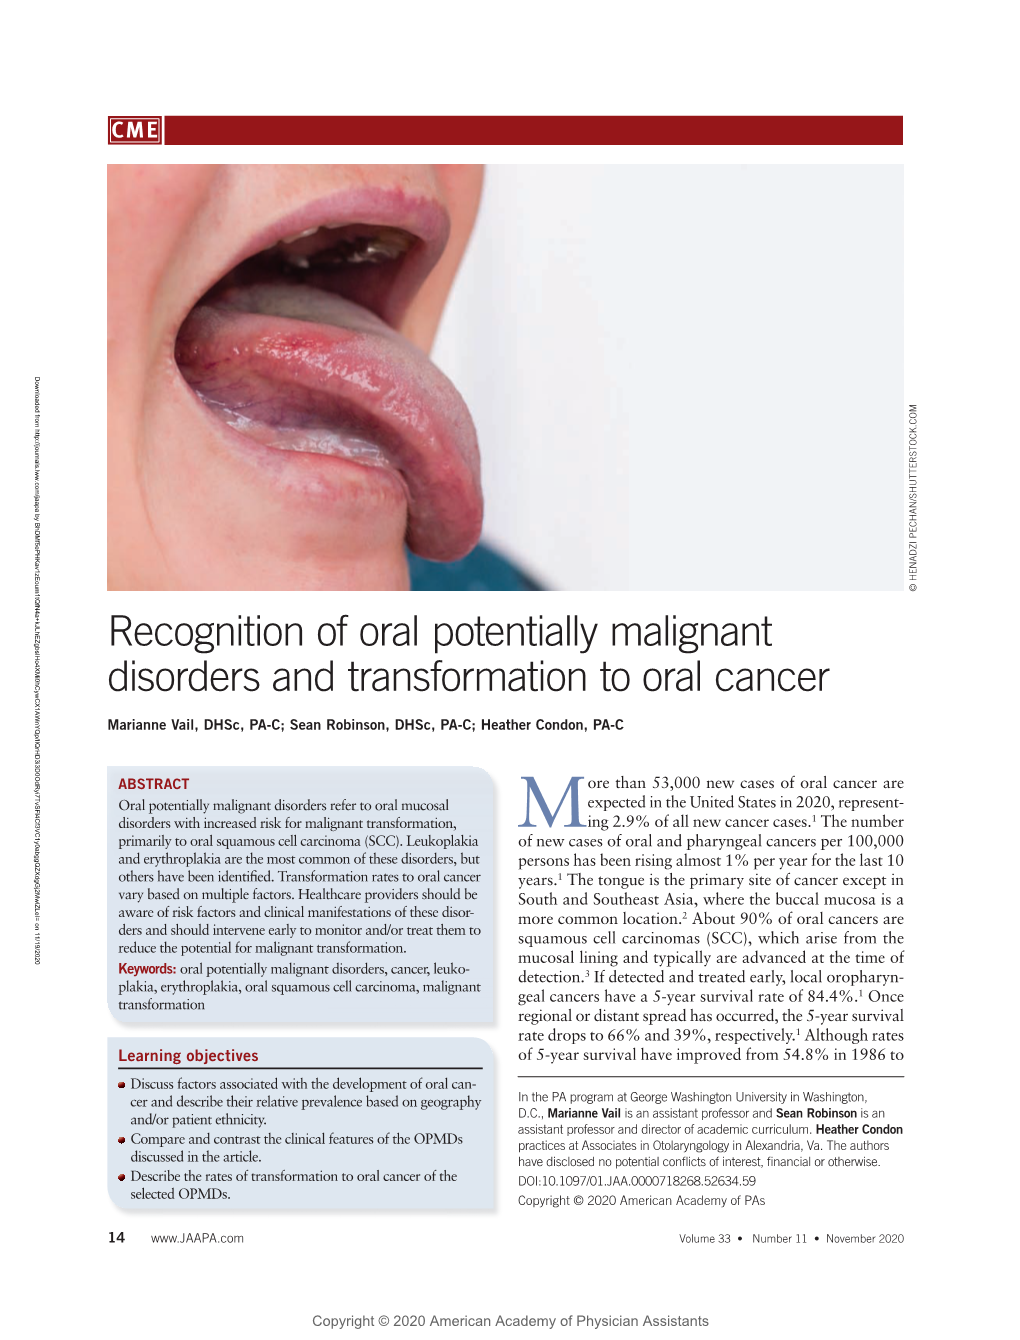 Recognition of Oral Potentially Malignant Disorders and Transformation to Oral Cancer